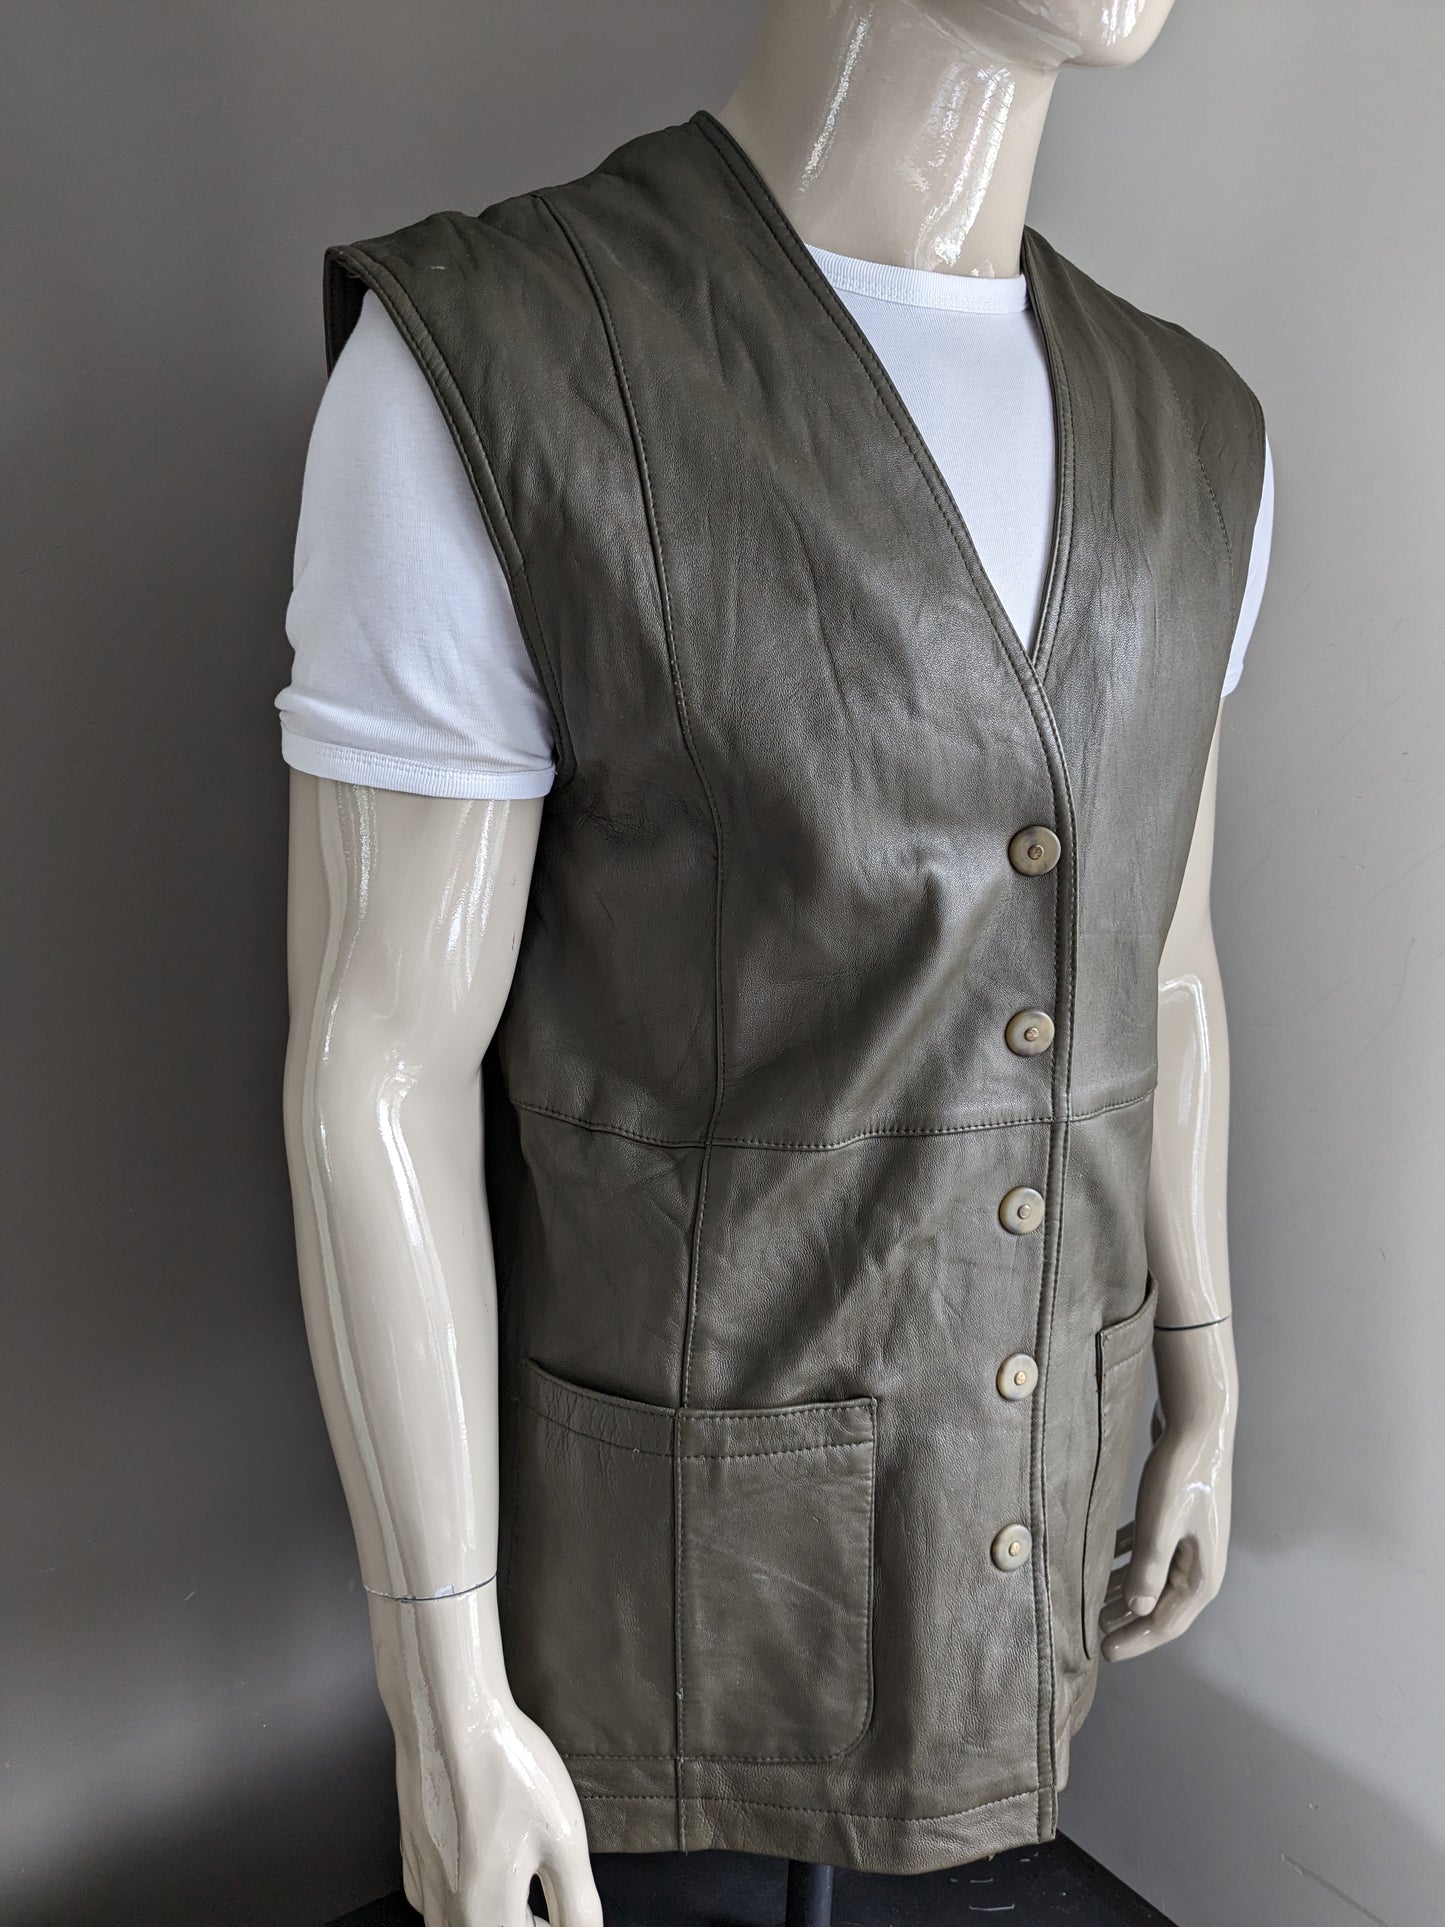 Vintage coda leather waistcoat with press studs. Dark green colored. Size L. Learn back